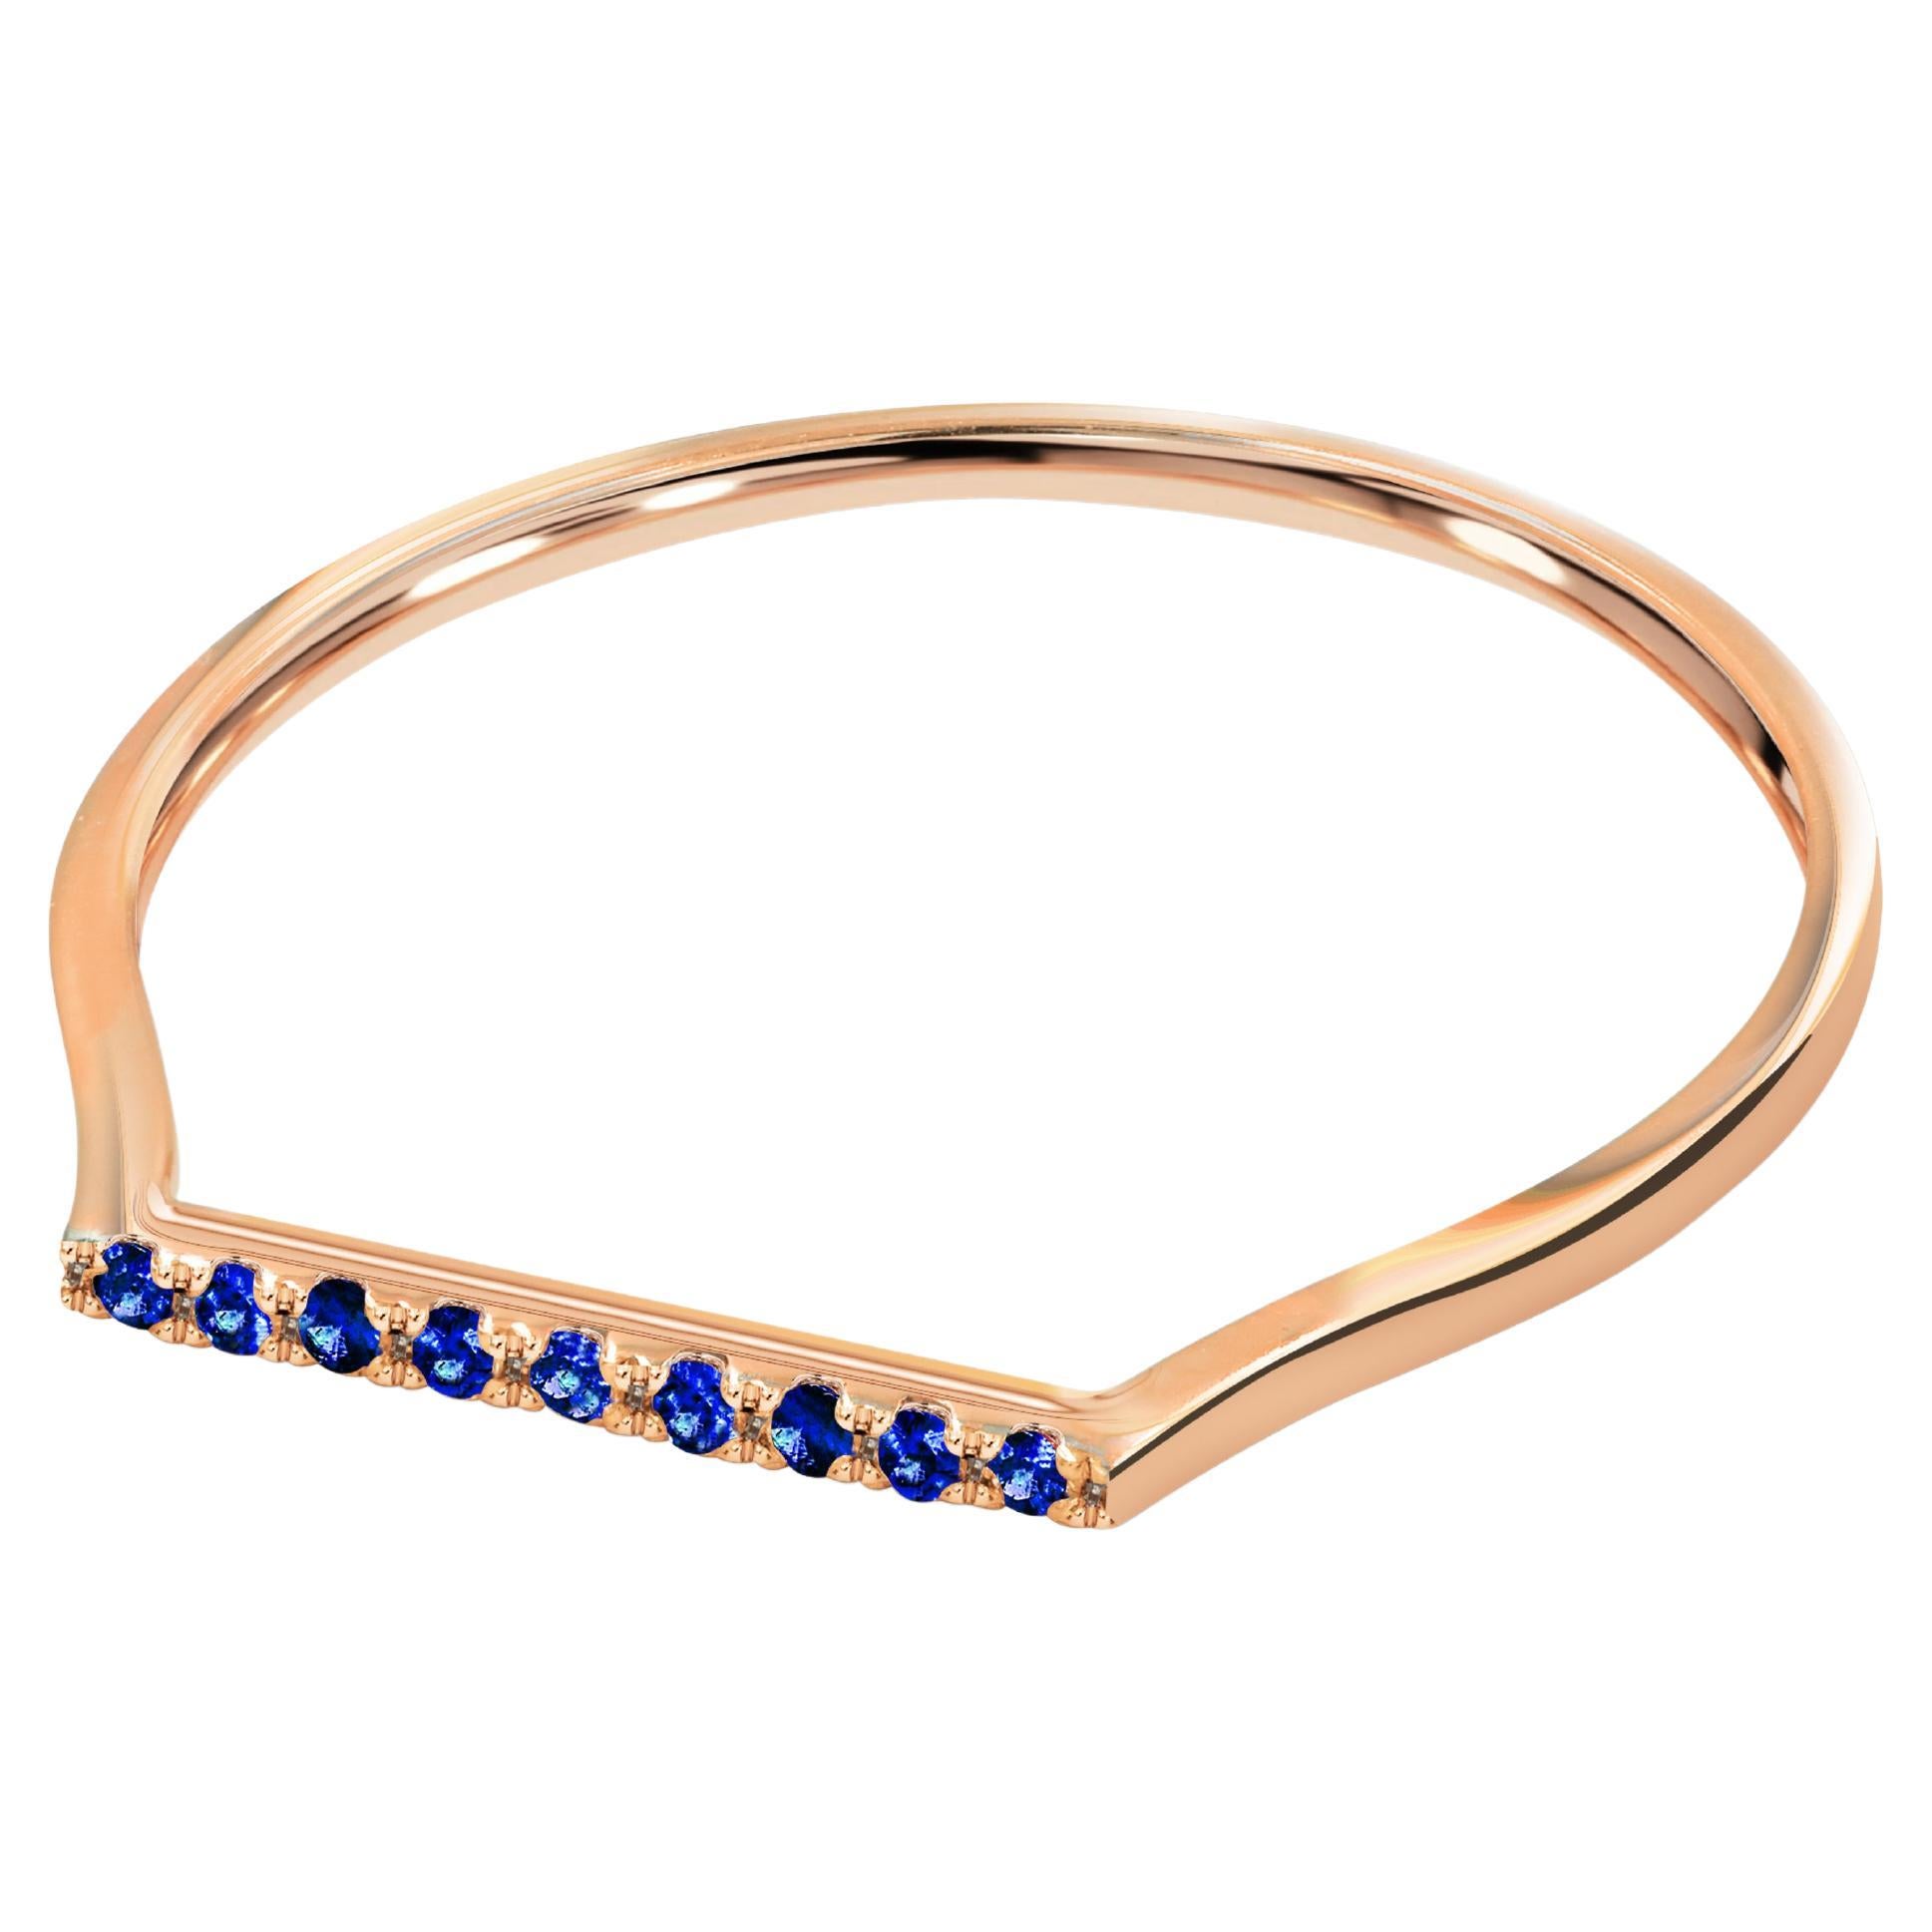 For Sale:  14k Gold Natural Sapphire Ring Thin Stacking Gold Ring